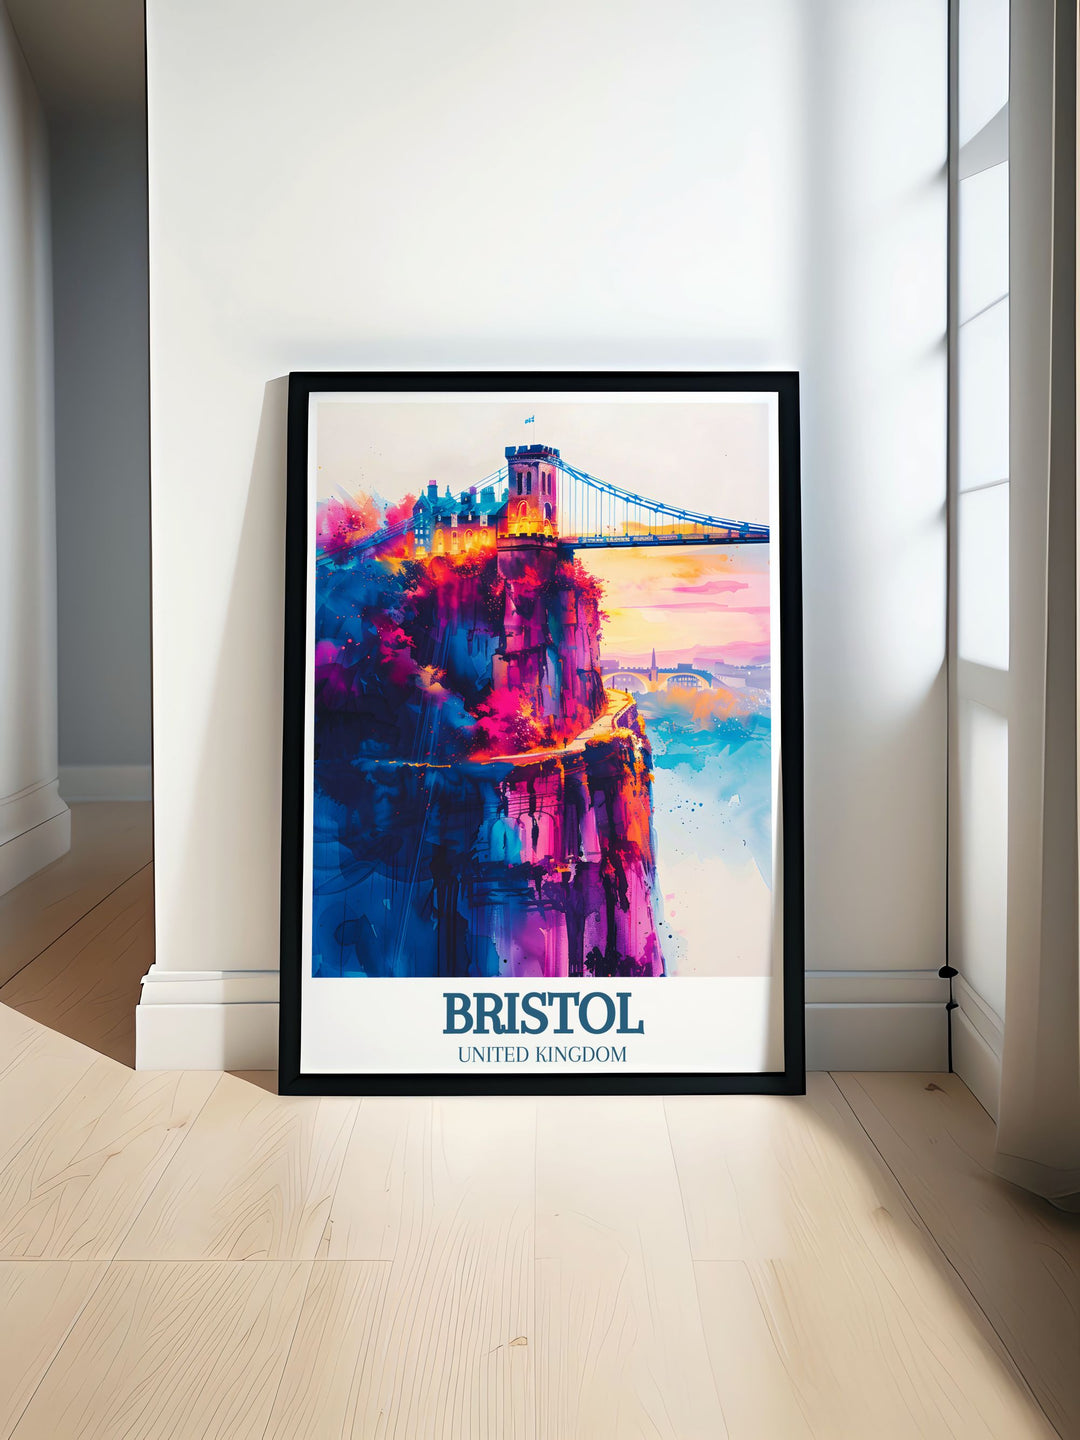 Ashton Court Poster featuring Nova Trail MTB captures the thrill of mountain biking with the iconic Clifton suspension bridge River Avon in the background. Perfect wall art for cycling enthusiasts and home decor, this print combines adventure and scenic beauty.